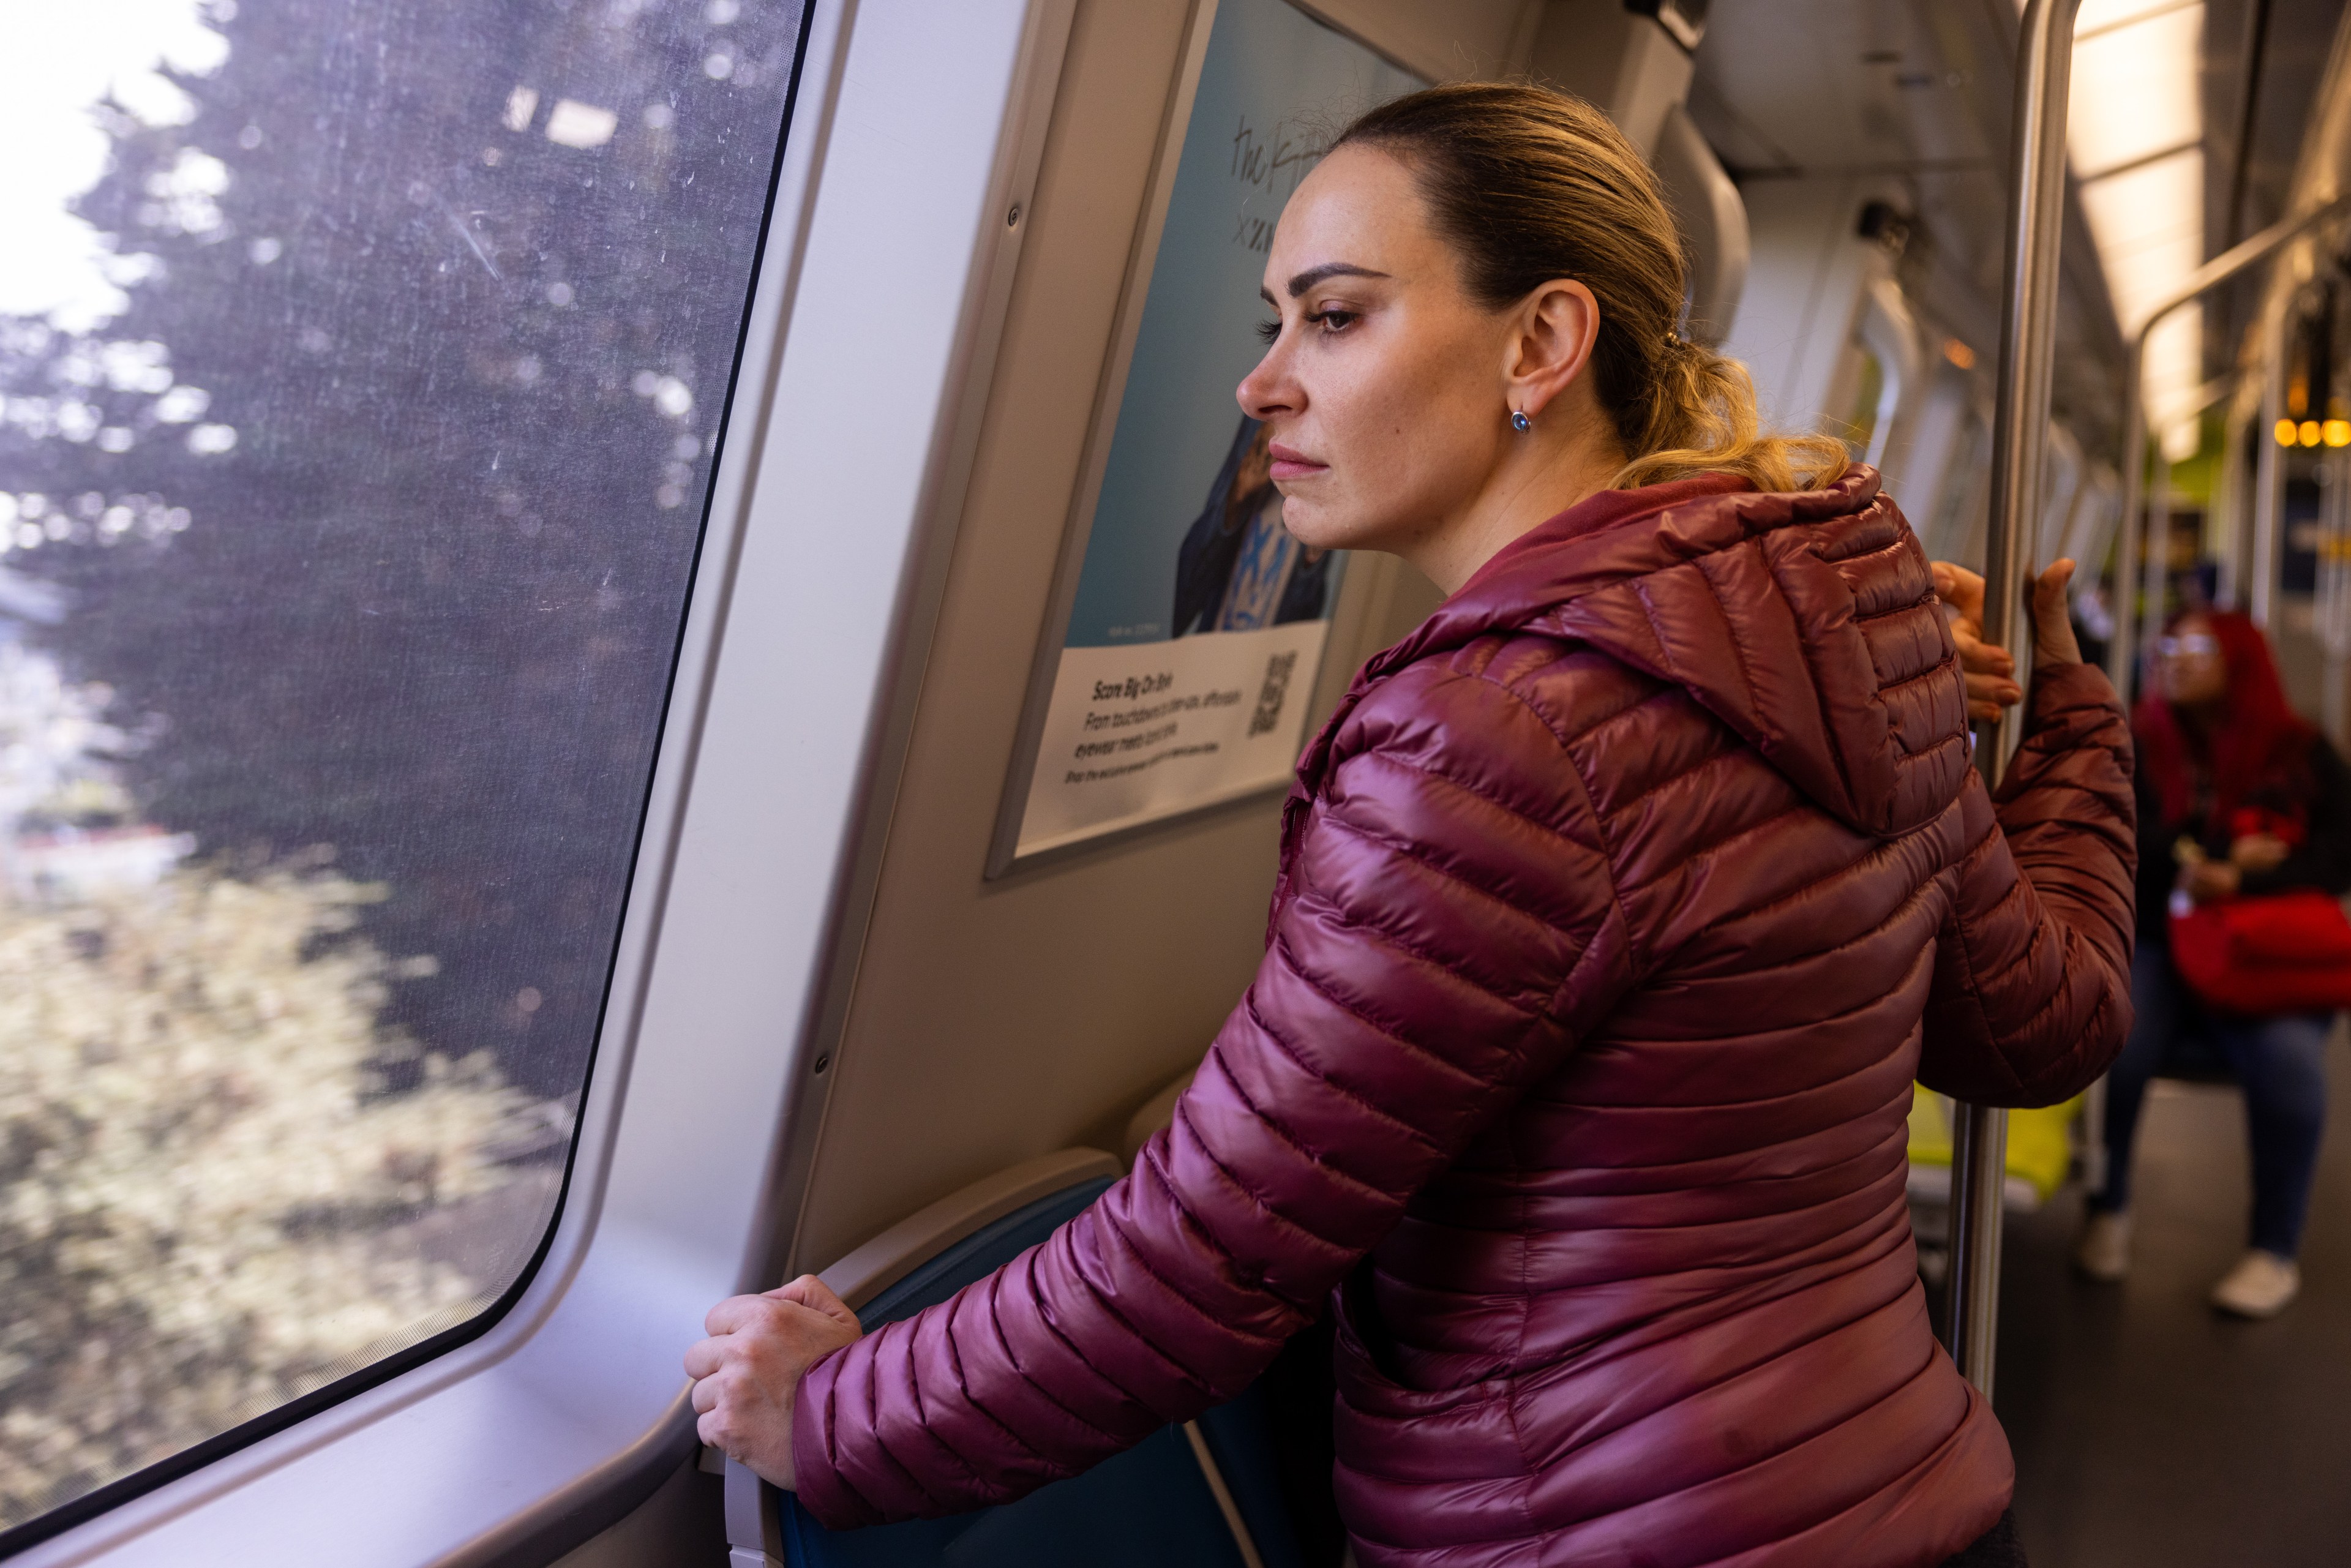 A woman gazes out a train window, trees blur past. She wears a maroon jacket, holding onto a rail, seemingly lost in thought.